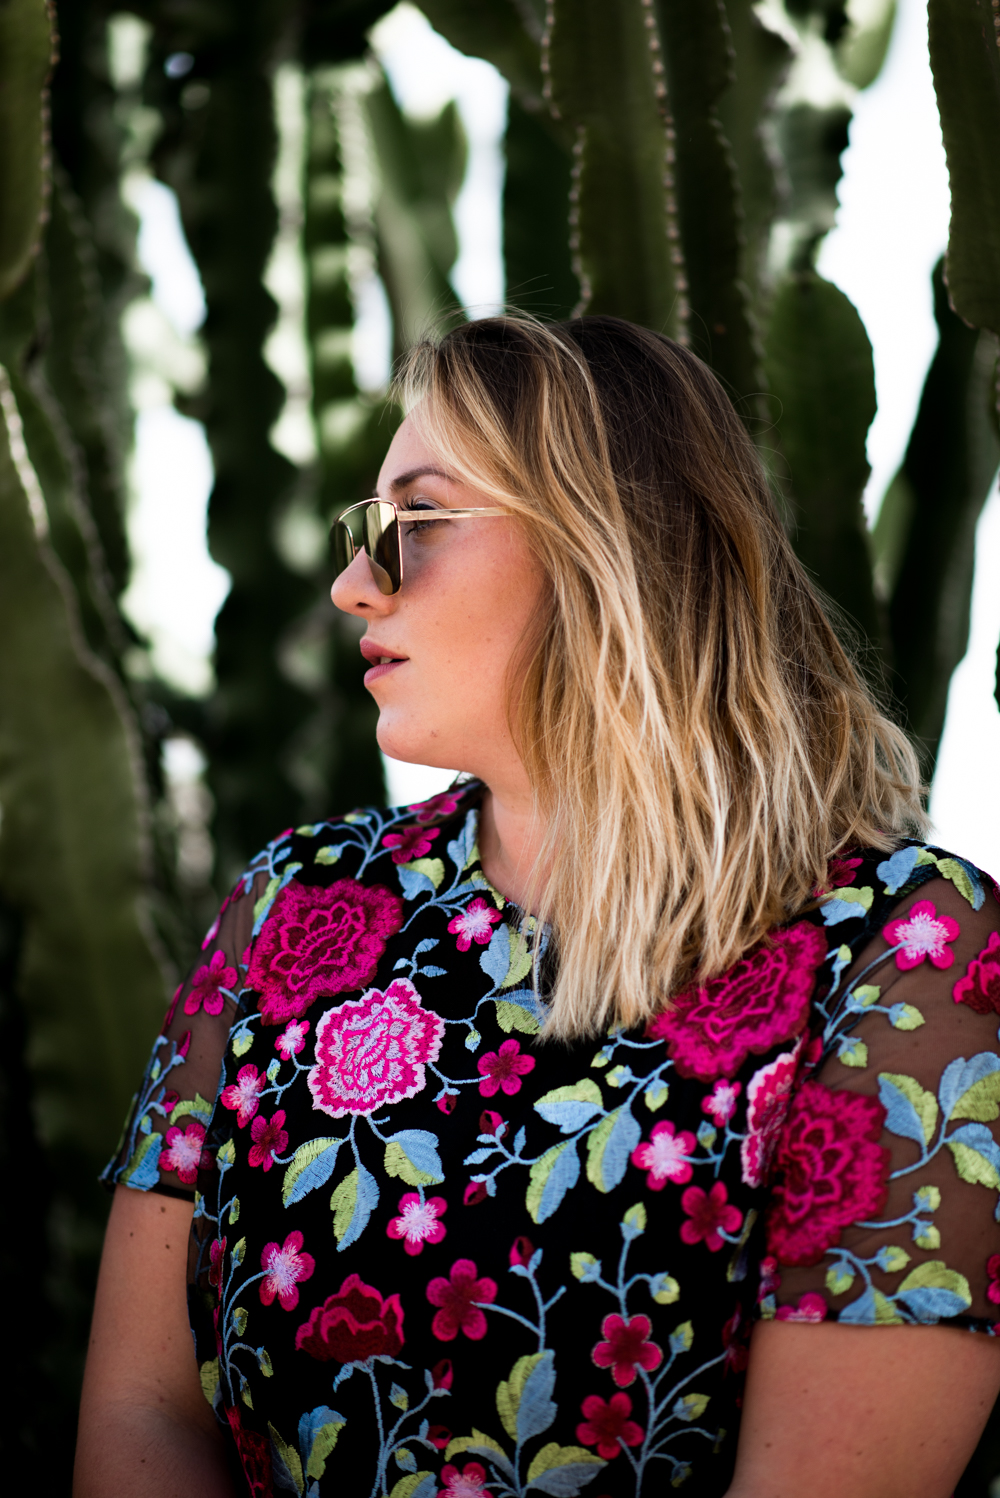 River Island_The Skinny and the Curvy One_Plussize Blogger_Plus Size Germany_Curve Blogger_Flower Dress_Fashionblogger Germany_Fashionblog Deutschland_Fashionblog Muenchen (6 von 6)